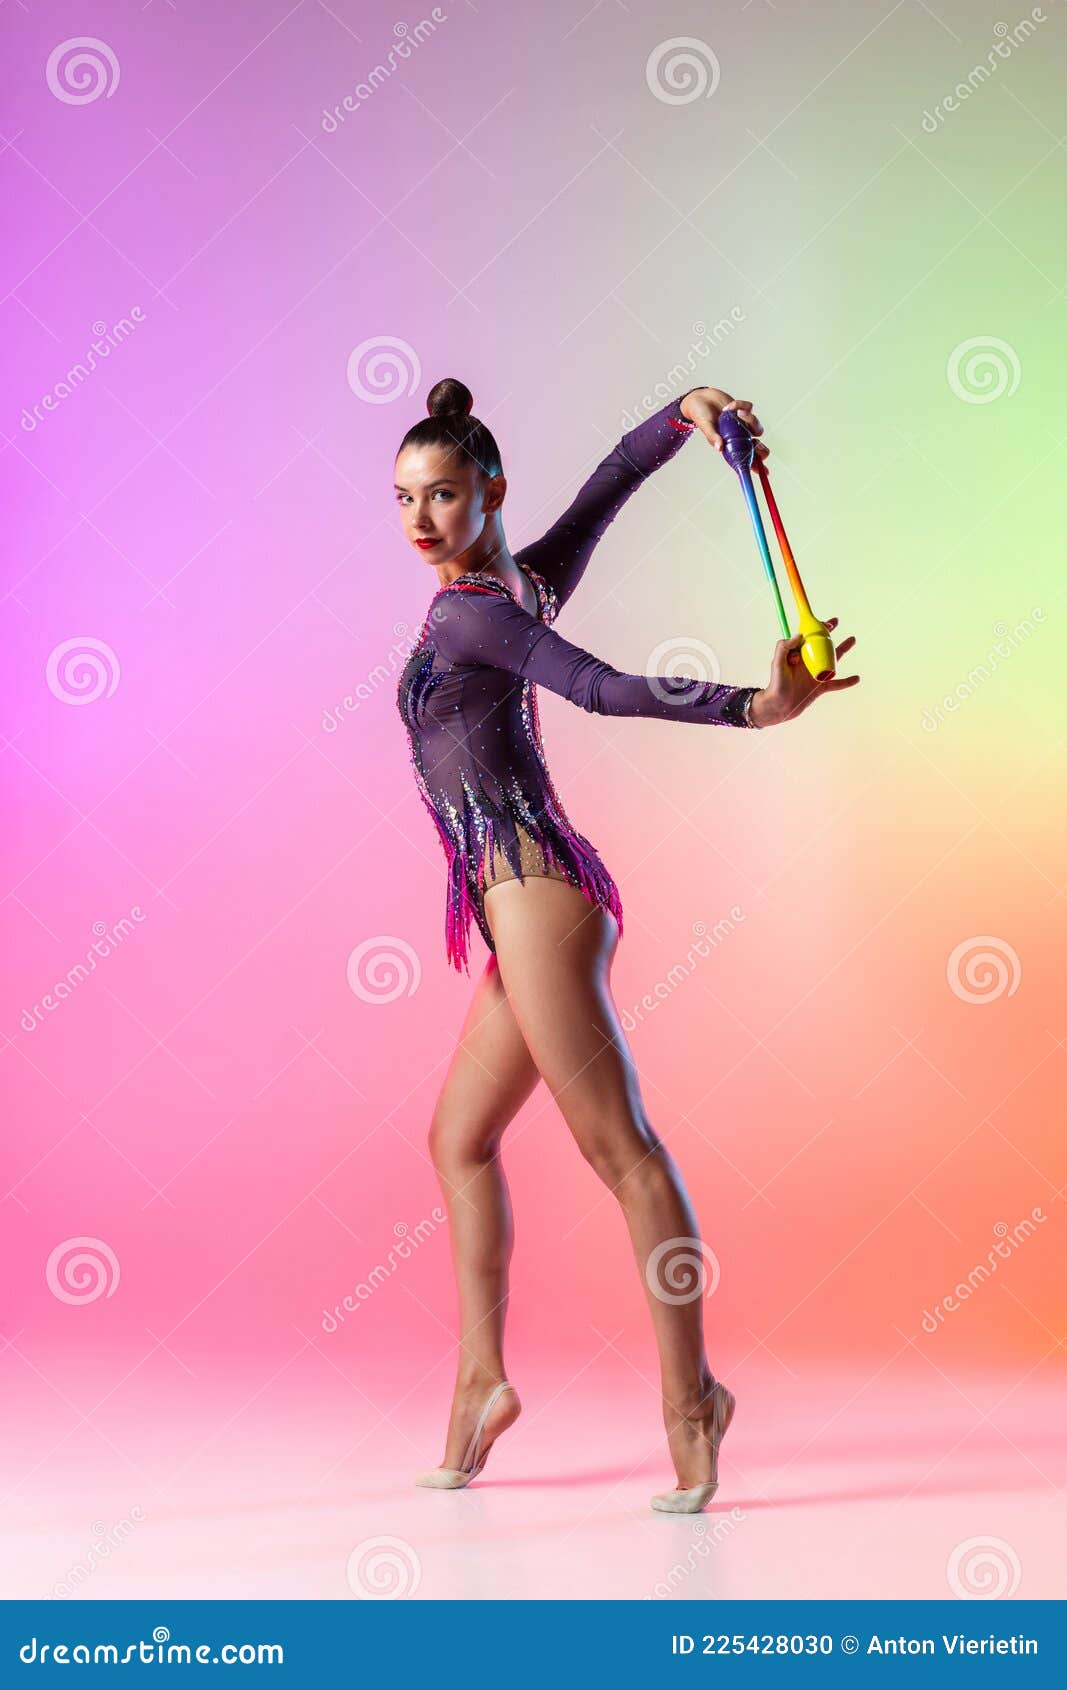 https://thumbs.dreamstime.com/z/beautiful-female-rhythmic-gymnast-clubs-behind-her-back-isolated-multicolored-neon-background-young-flexible-female-225428030.jpg